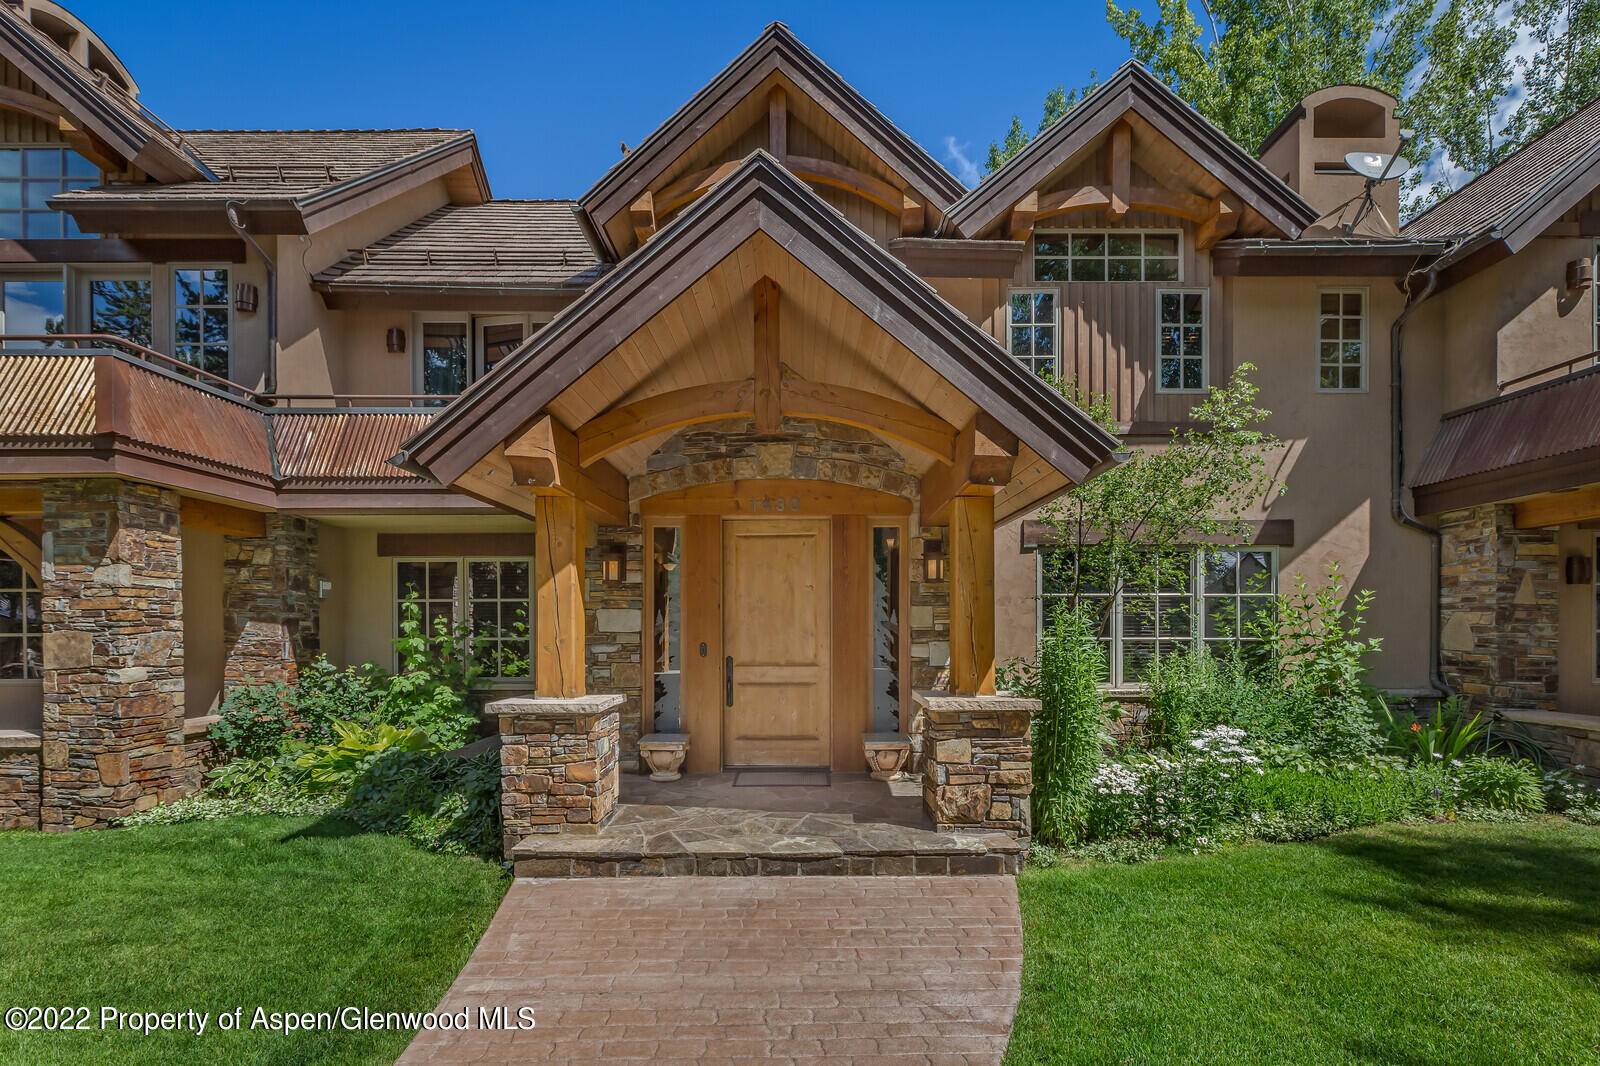 Newly updated West Aspen home with bright upper level living, cathedral ceilings, and wood trusses.